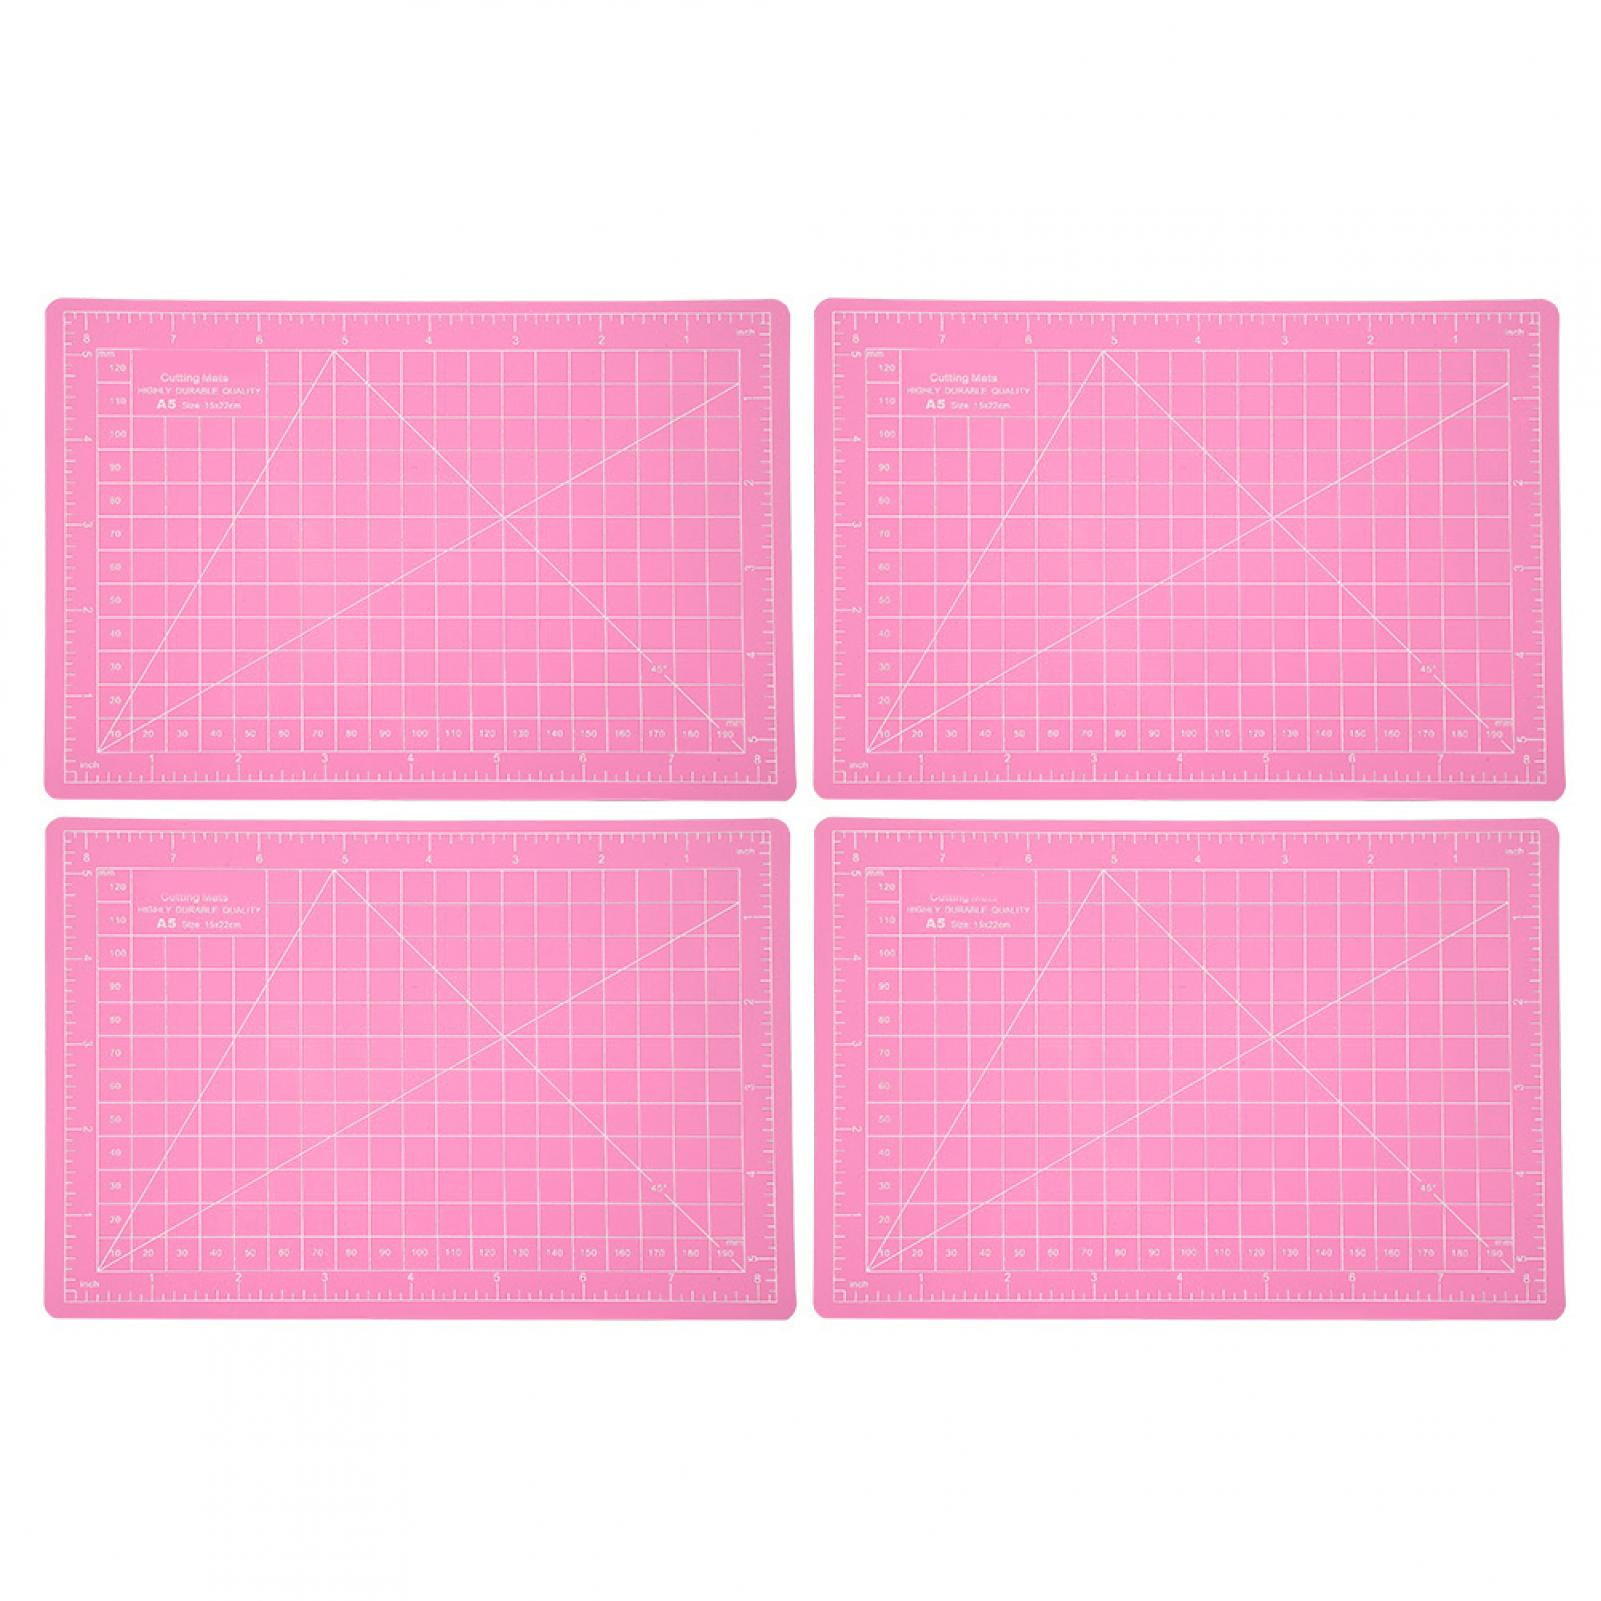 Pvc Pink Model Cut Pad 22 X 15Cm 8.7 X 5.9In Writing For Negative Film Cutting Cutting Mat Model Cutting Mat